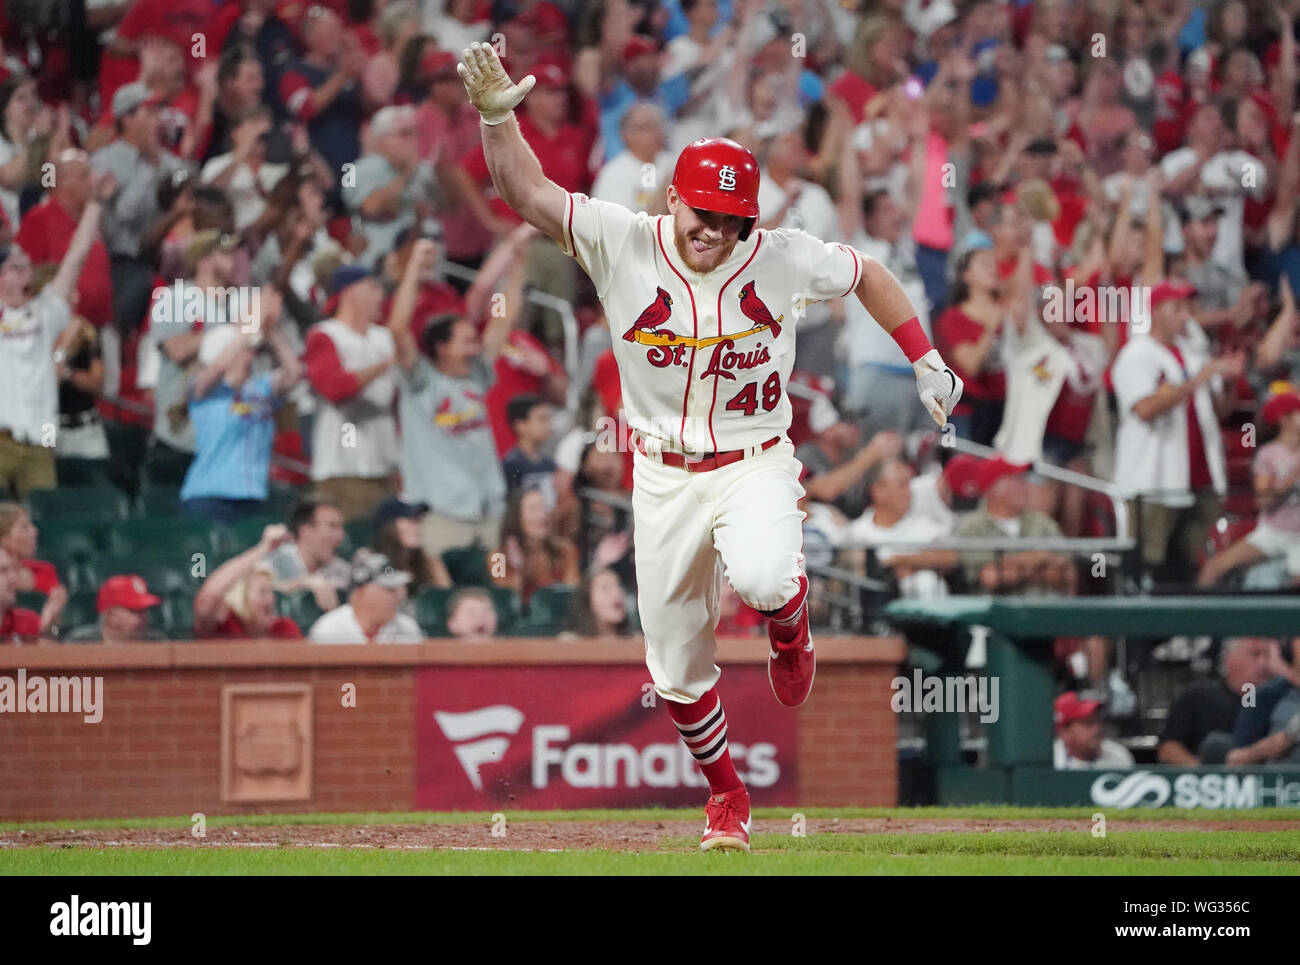 St. Louis Cardinals Harrison Bader throws his arm up after hitting a game tying RBI single in the ninth inning against the Cincinnati Reds in game two of their double header at Busch Stadium in St. Louis on Saturday, August 31, 2019. St. Louis won the game 3-2. Photo by Bill Greenblatt/UPI Stock Photo